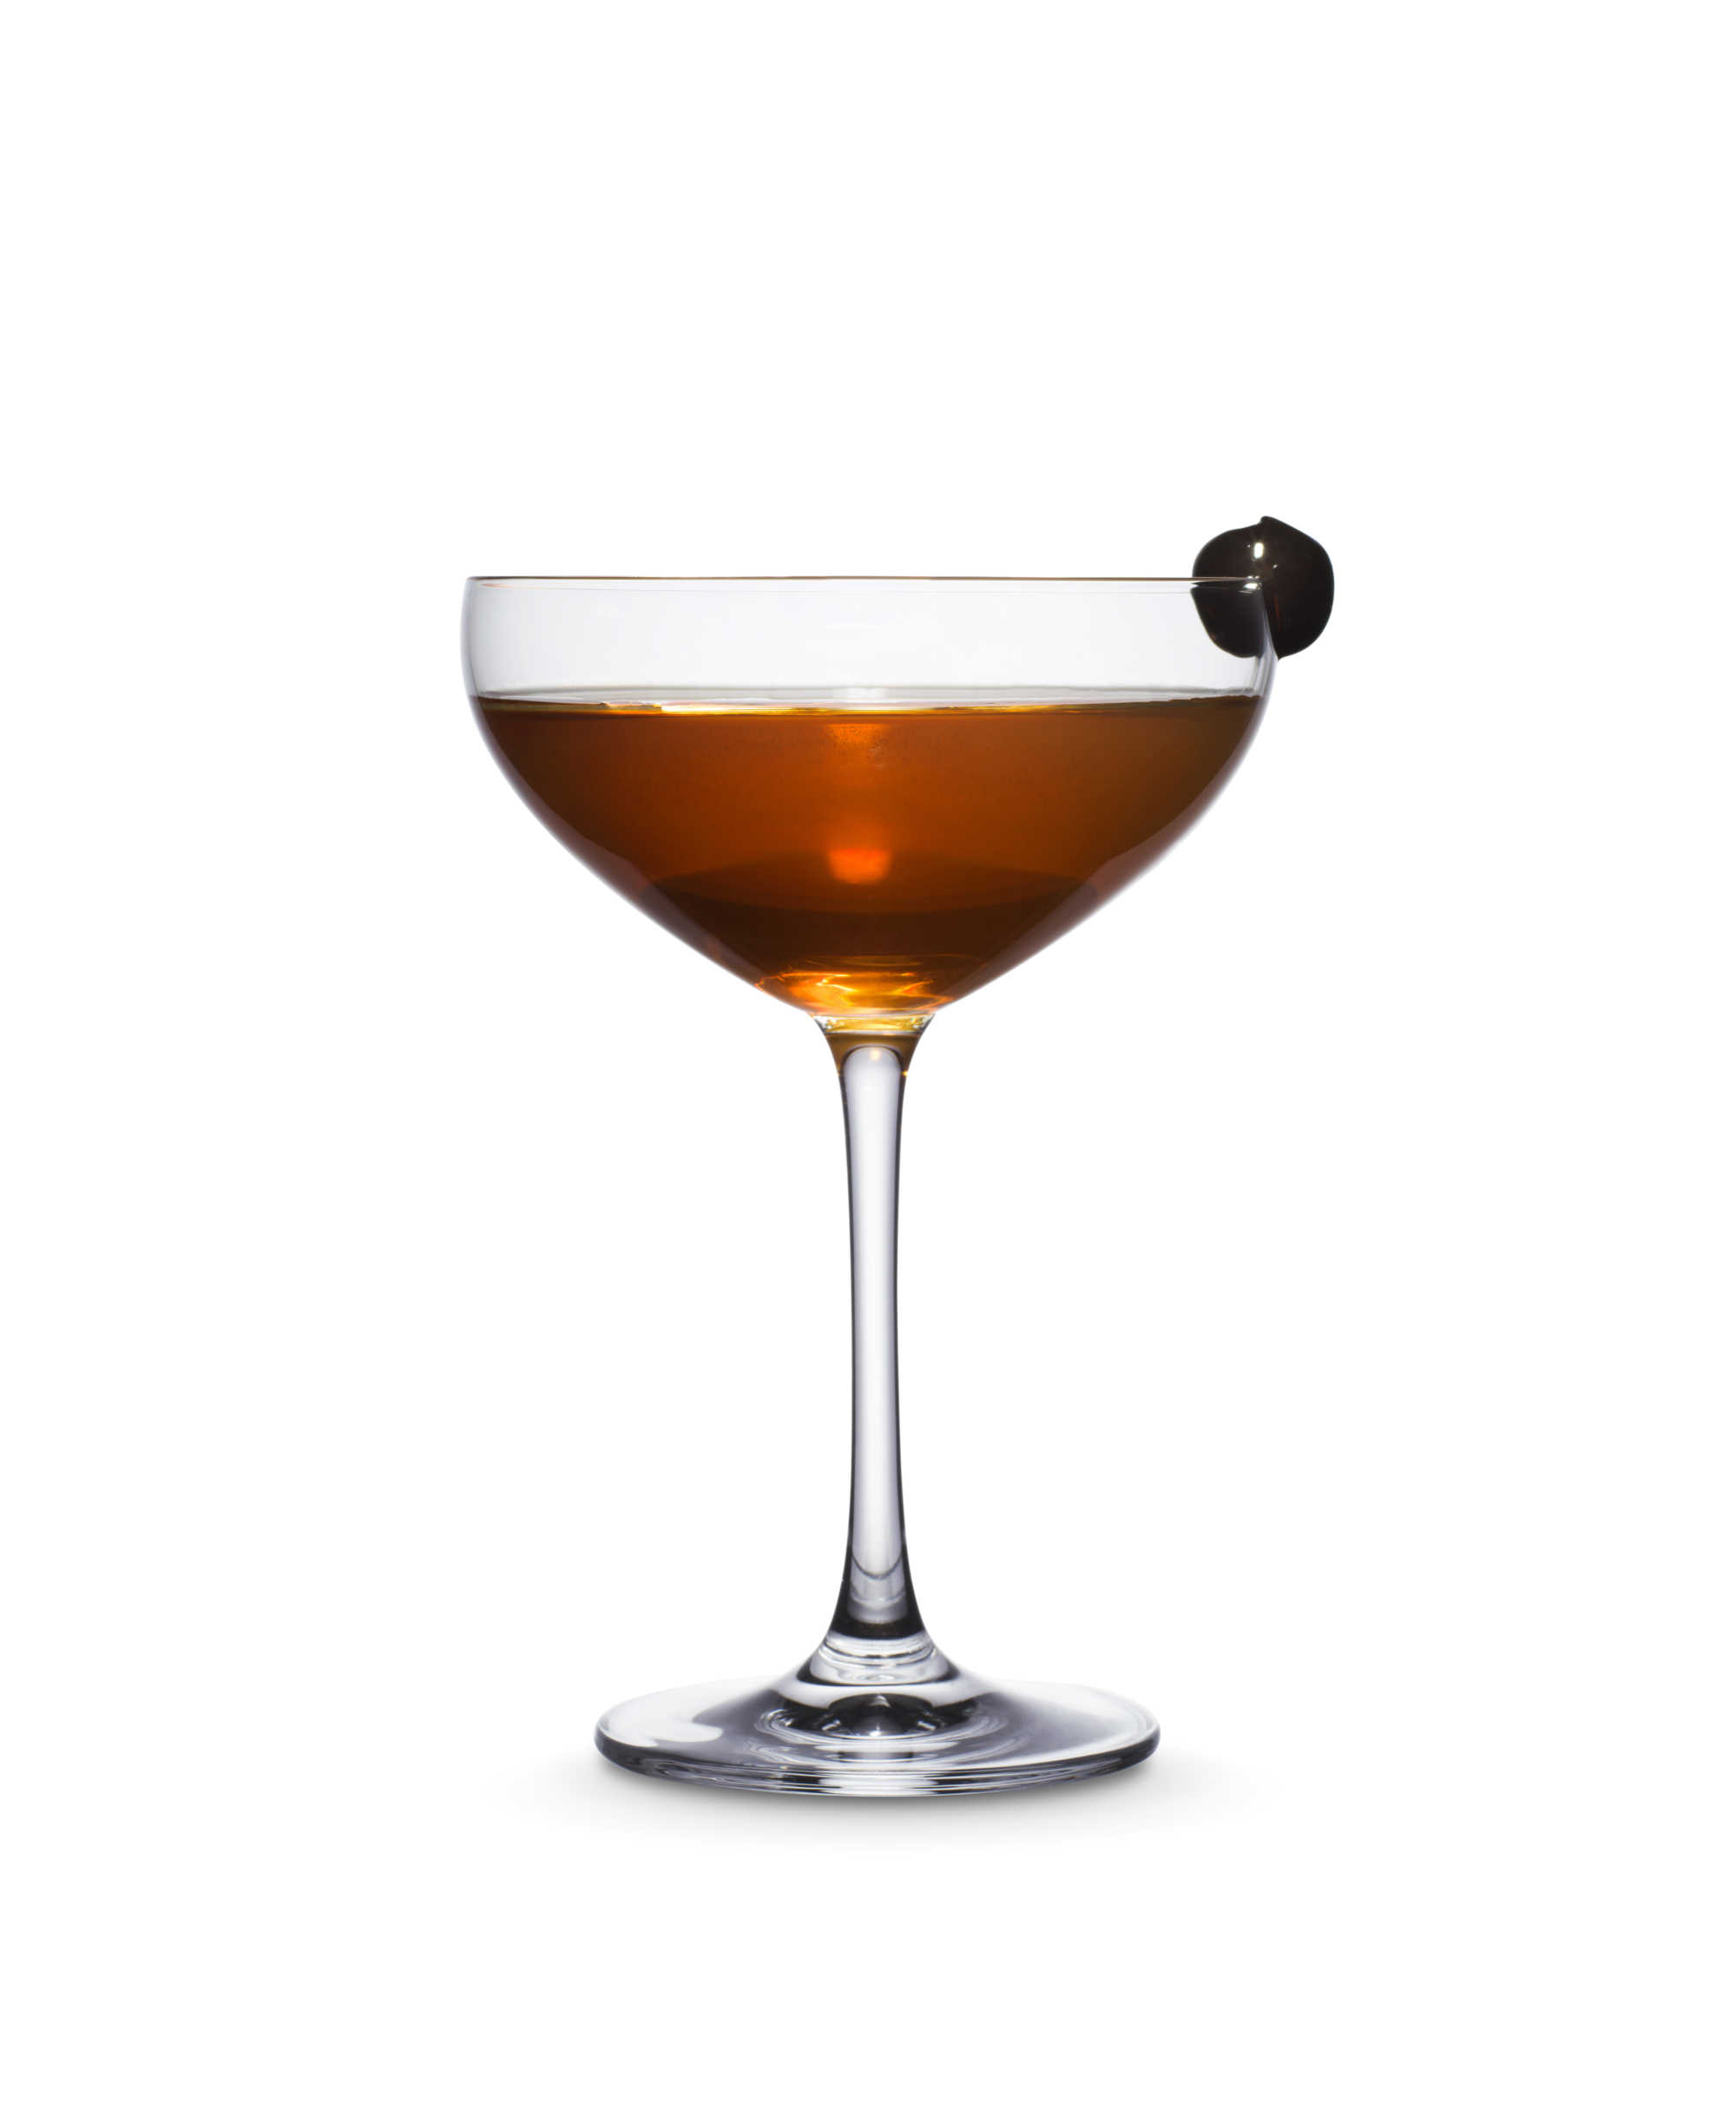 Classic Manhattan cocktail in a martini glass. Made using Kyrö Malt rye whisky and garnished with Maraschino cherry.